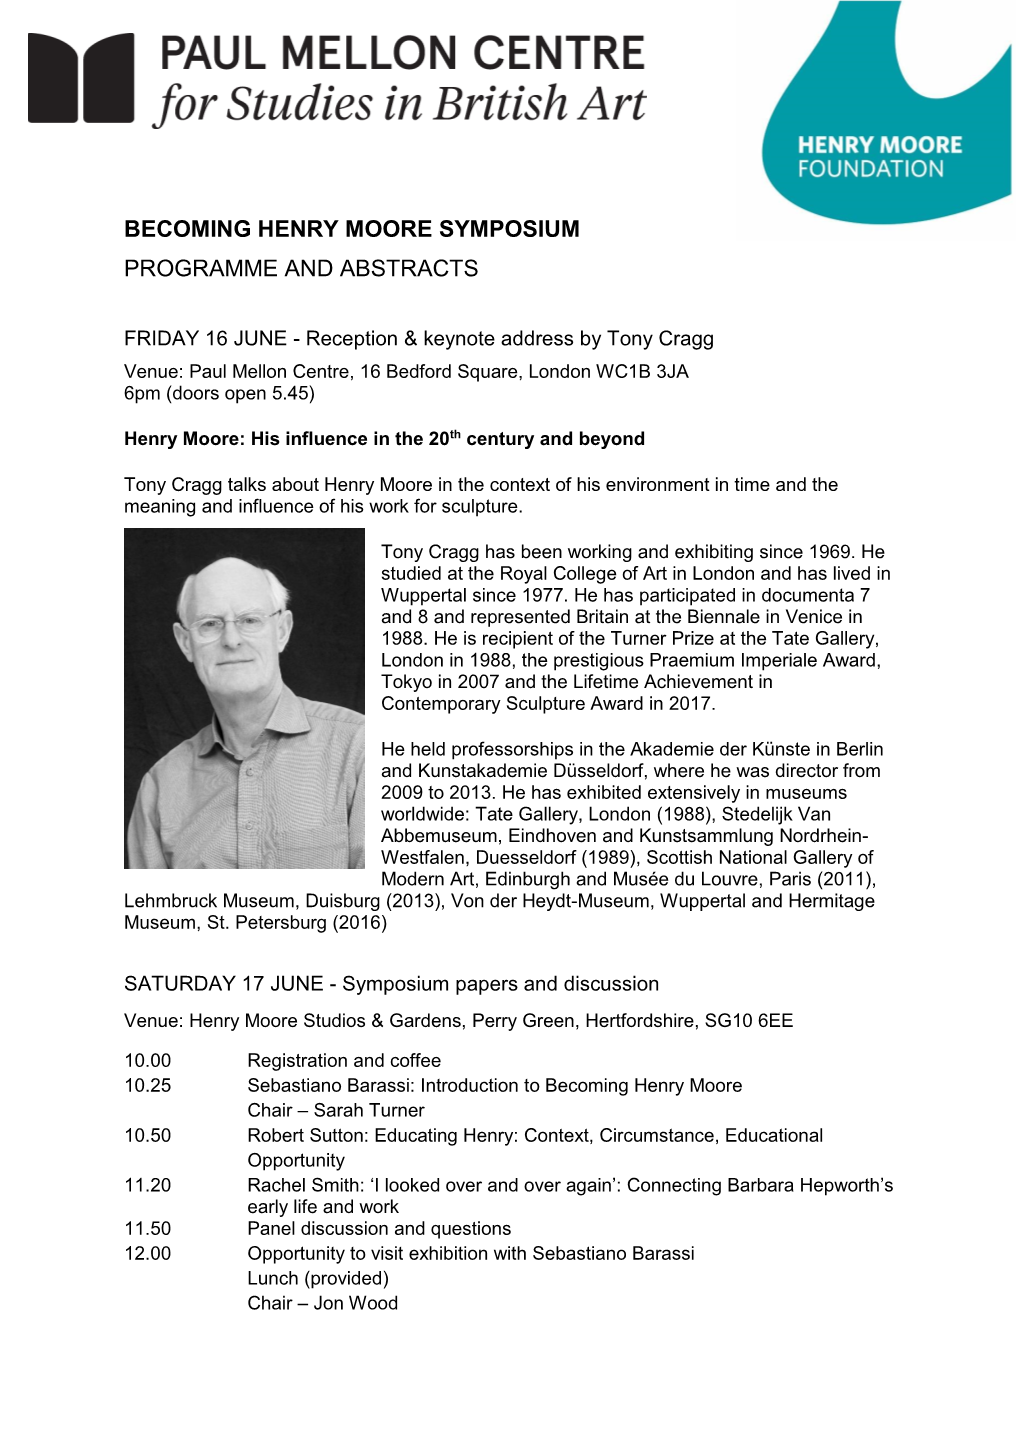 Becoming Henry Moore Symposium Programme and Abstracts